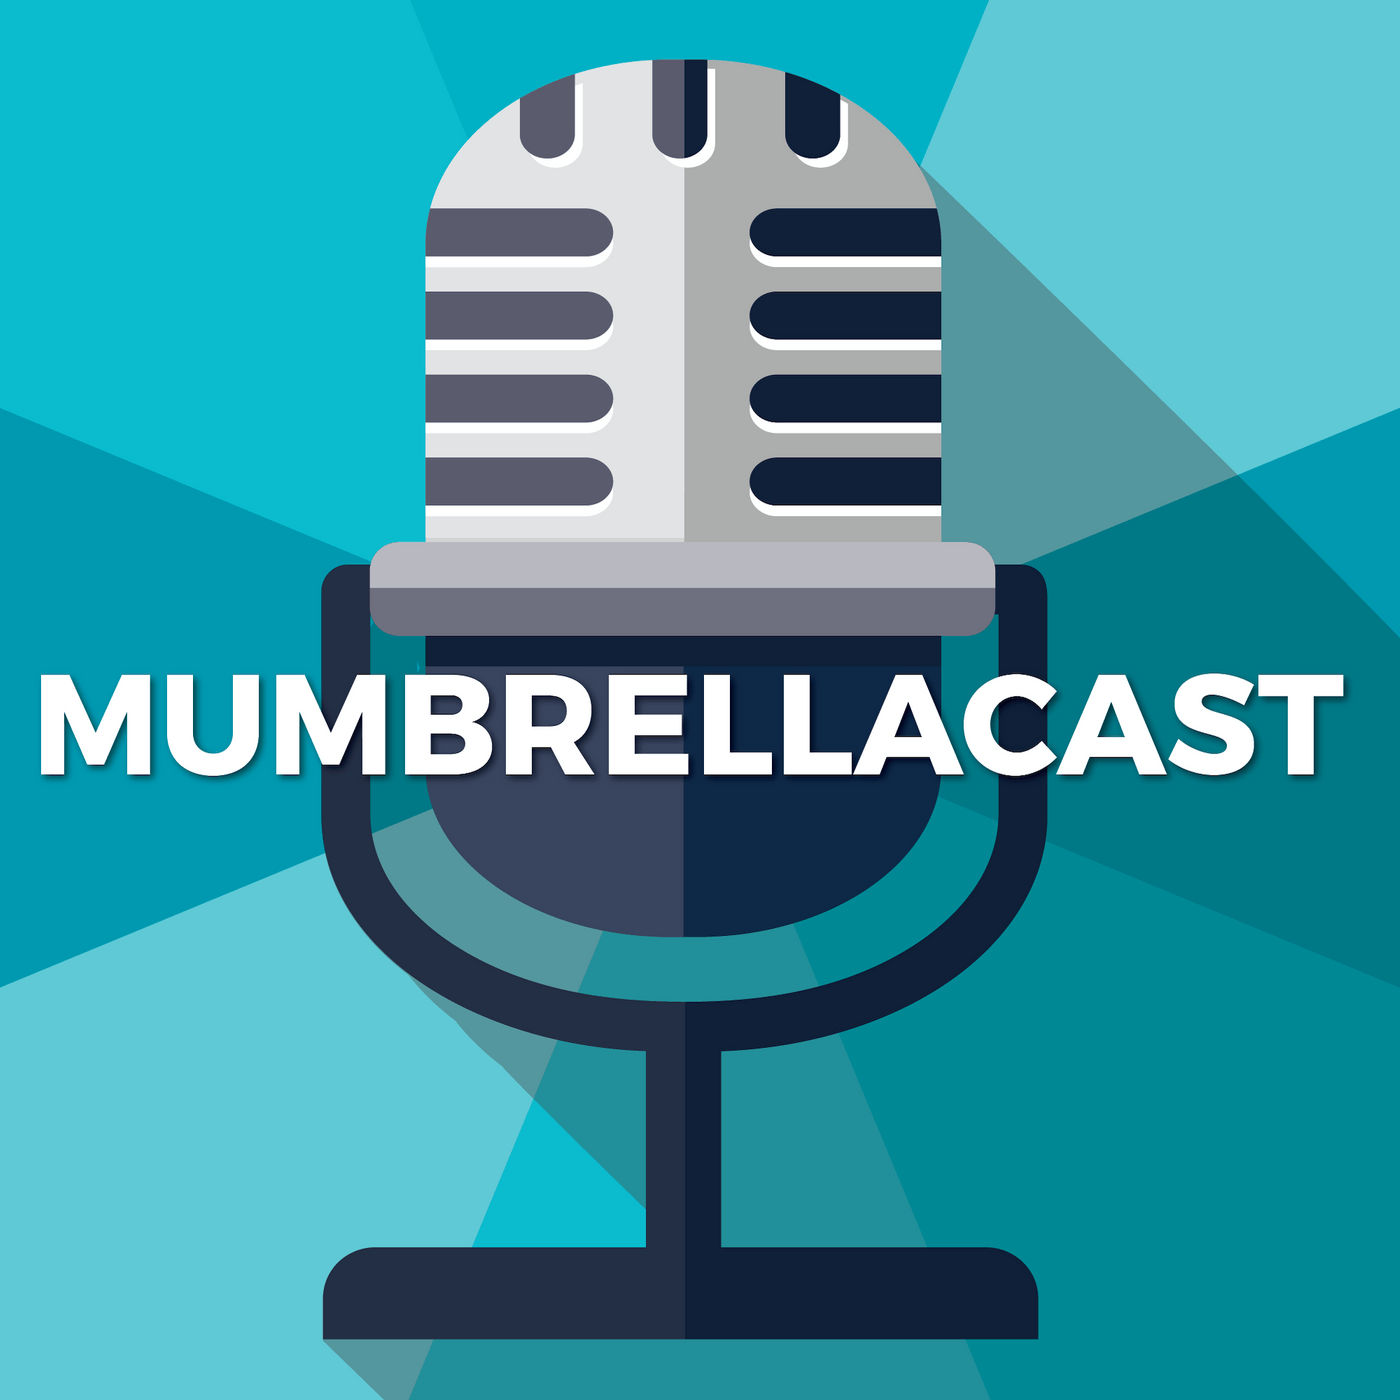 Mumbrellacast: TV Blackbox's Rob McKnight On Why Rove Flopped, Getting Sacked And The Real Story Behind Studio 10's Brussels Sprout Incident